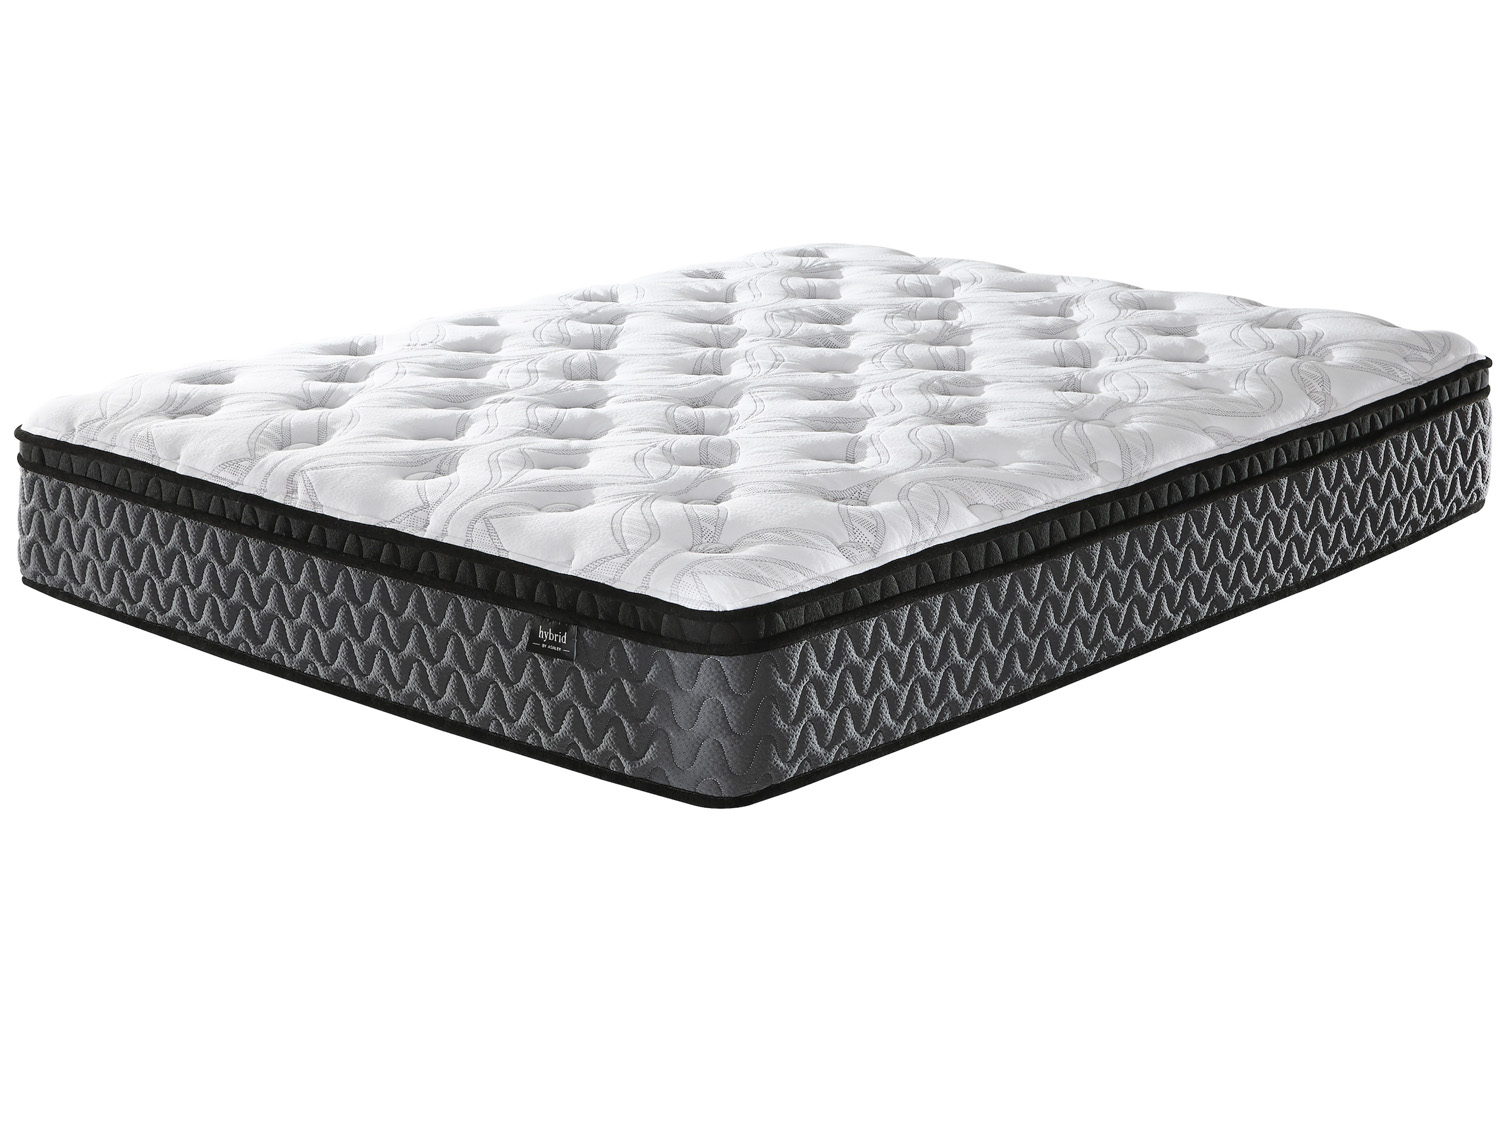 mattress with 9 inch pocketed coils